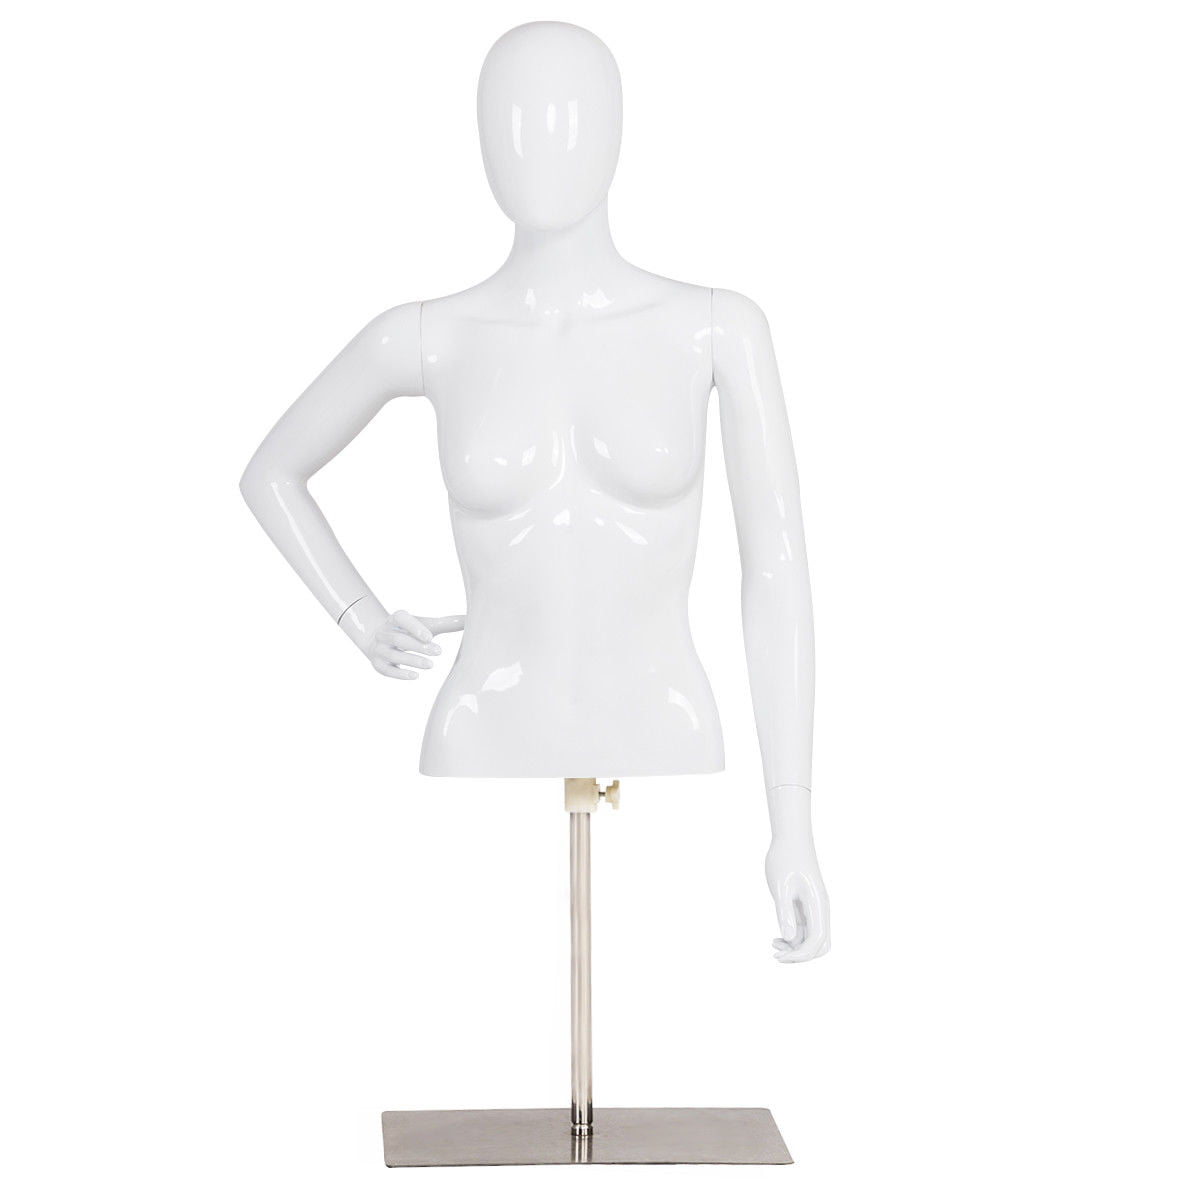 Steel base included Including base. Fiberglass material Matte White Color ROXY DISPLAY Female Mannequin Torso With nice figure and arms Removable neck and Arms MD-TFW-IV 